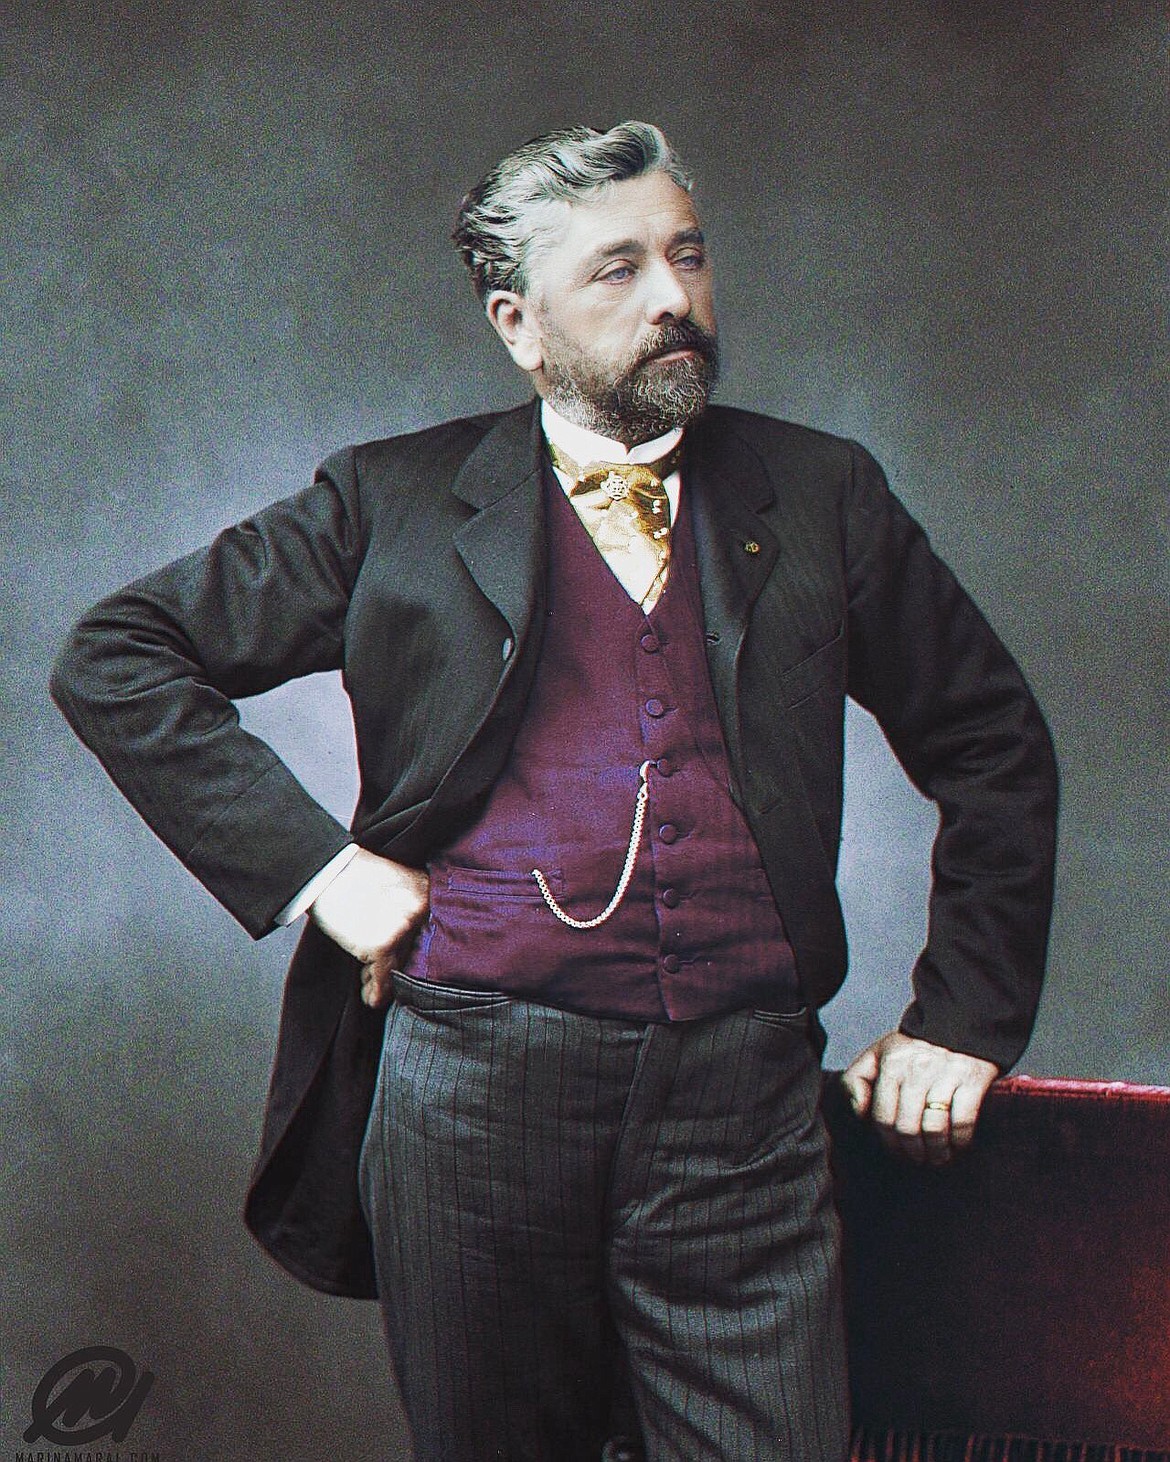 GOOGLE IMAGES
Gustave Eiffel (1832-1923) French architect and civil engineer whose legacy includes the Eiffel Tower and Statue of Liberty.